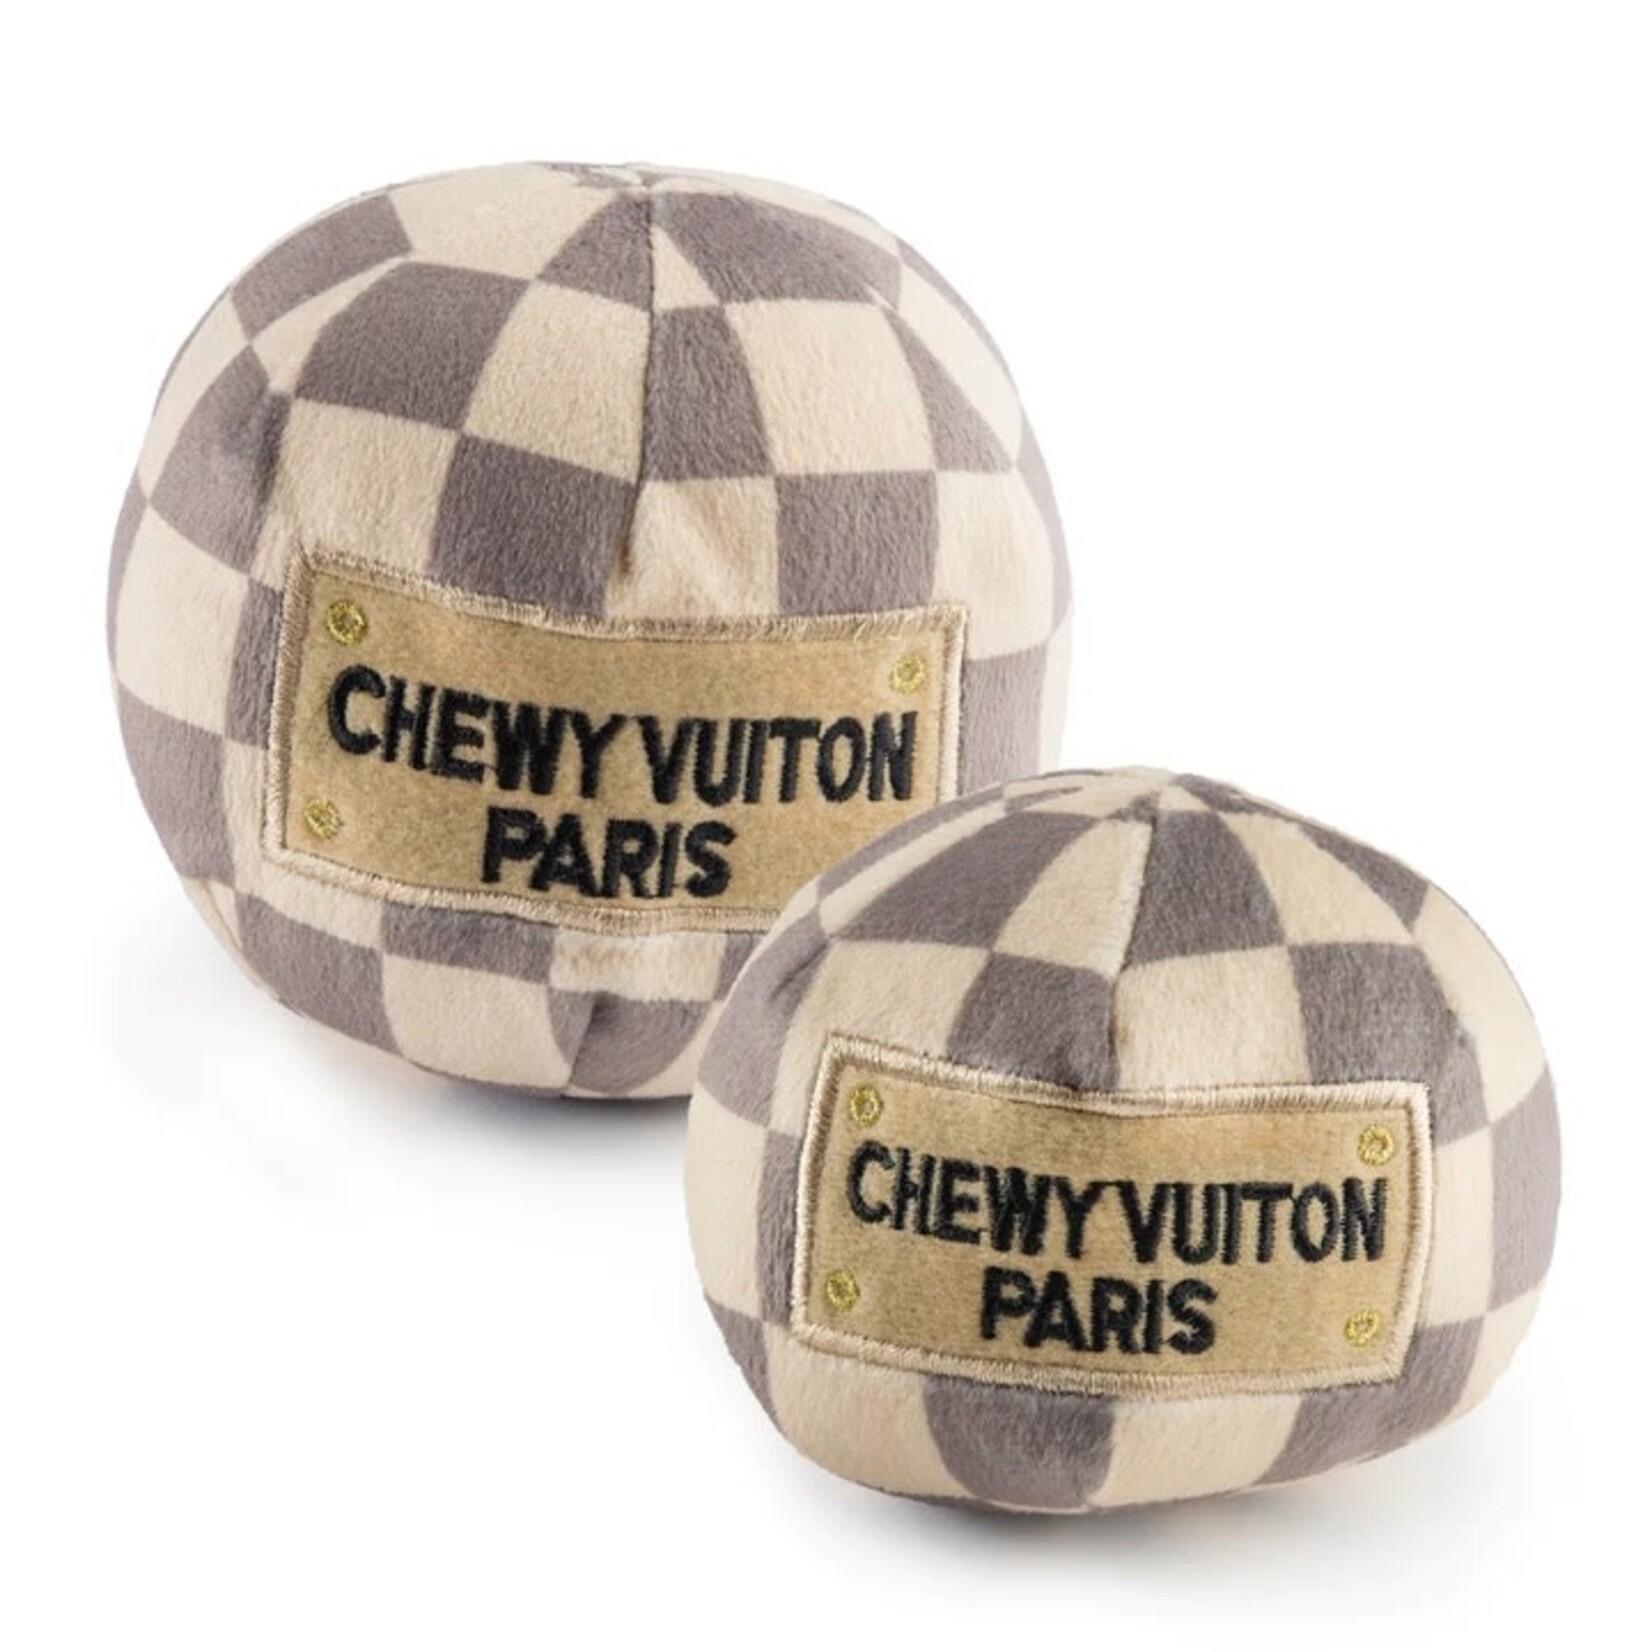 Haute Diggity Dog Checker Chewy Vuiton Ball Squeaker Dog Toy | Small